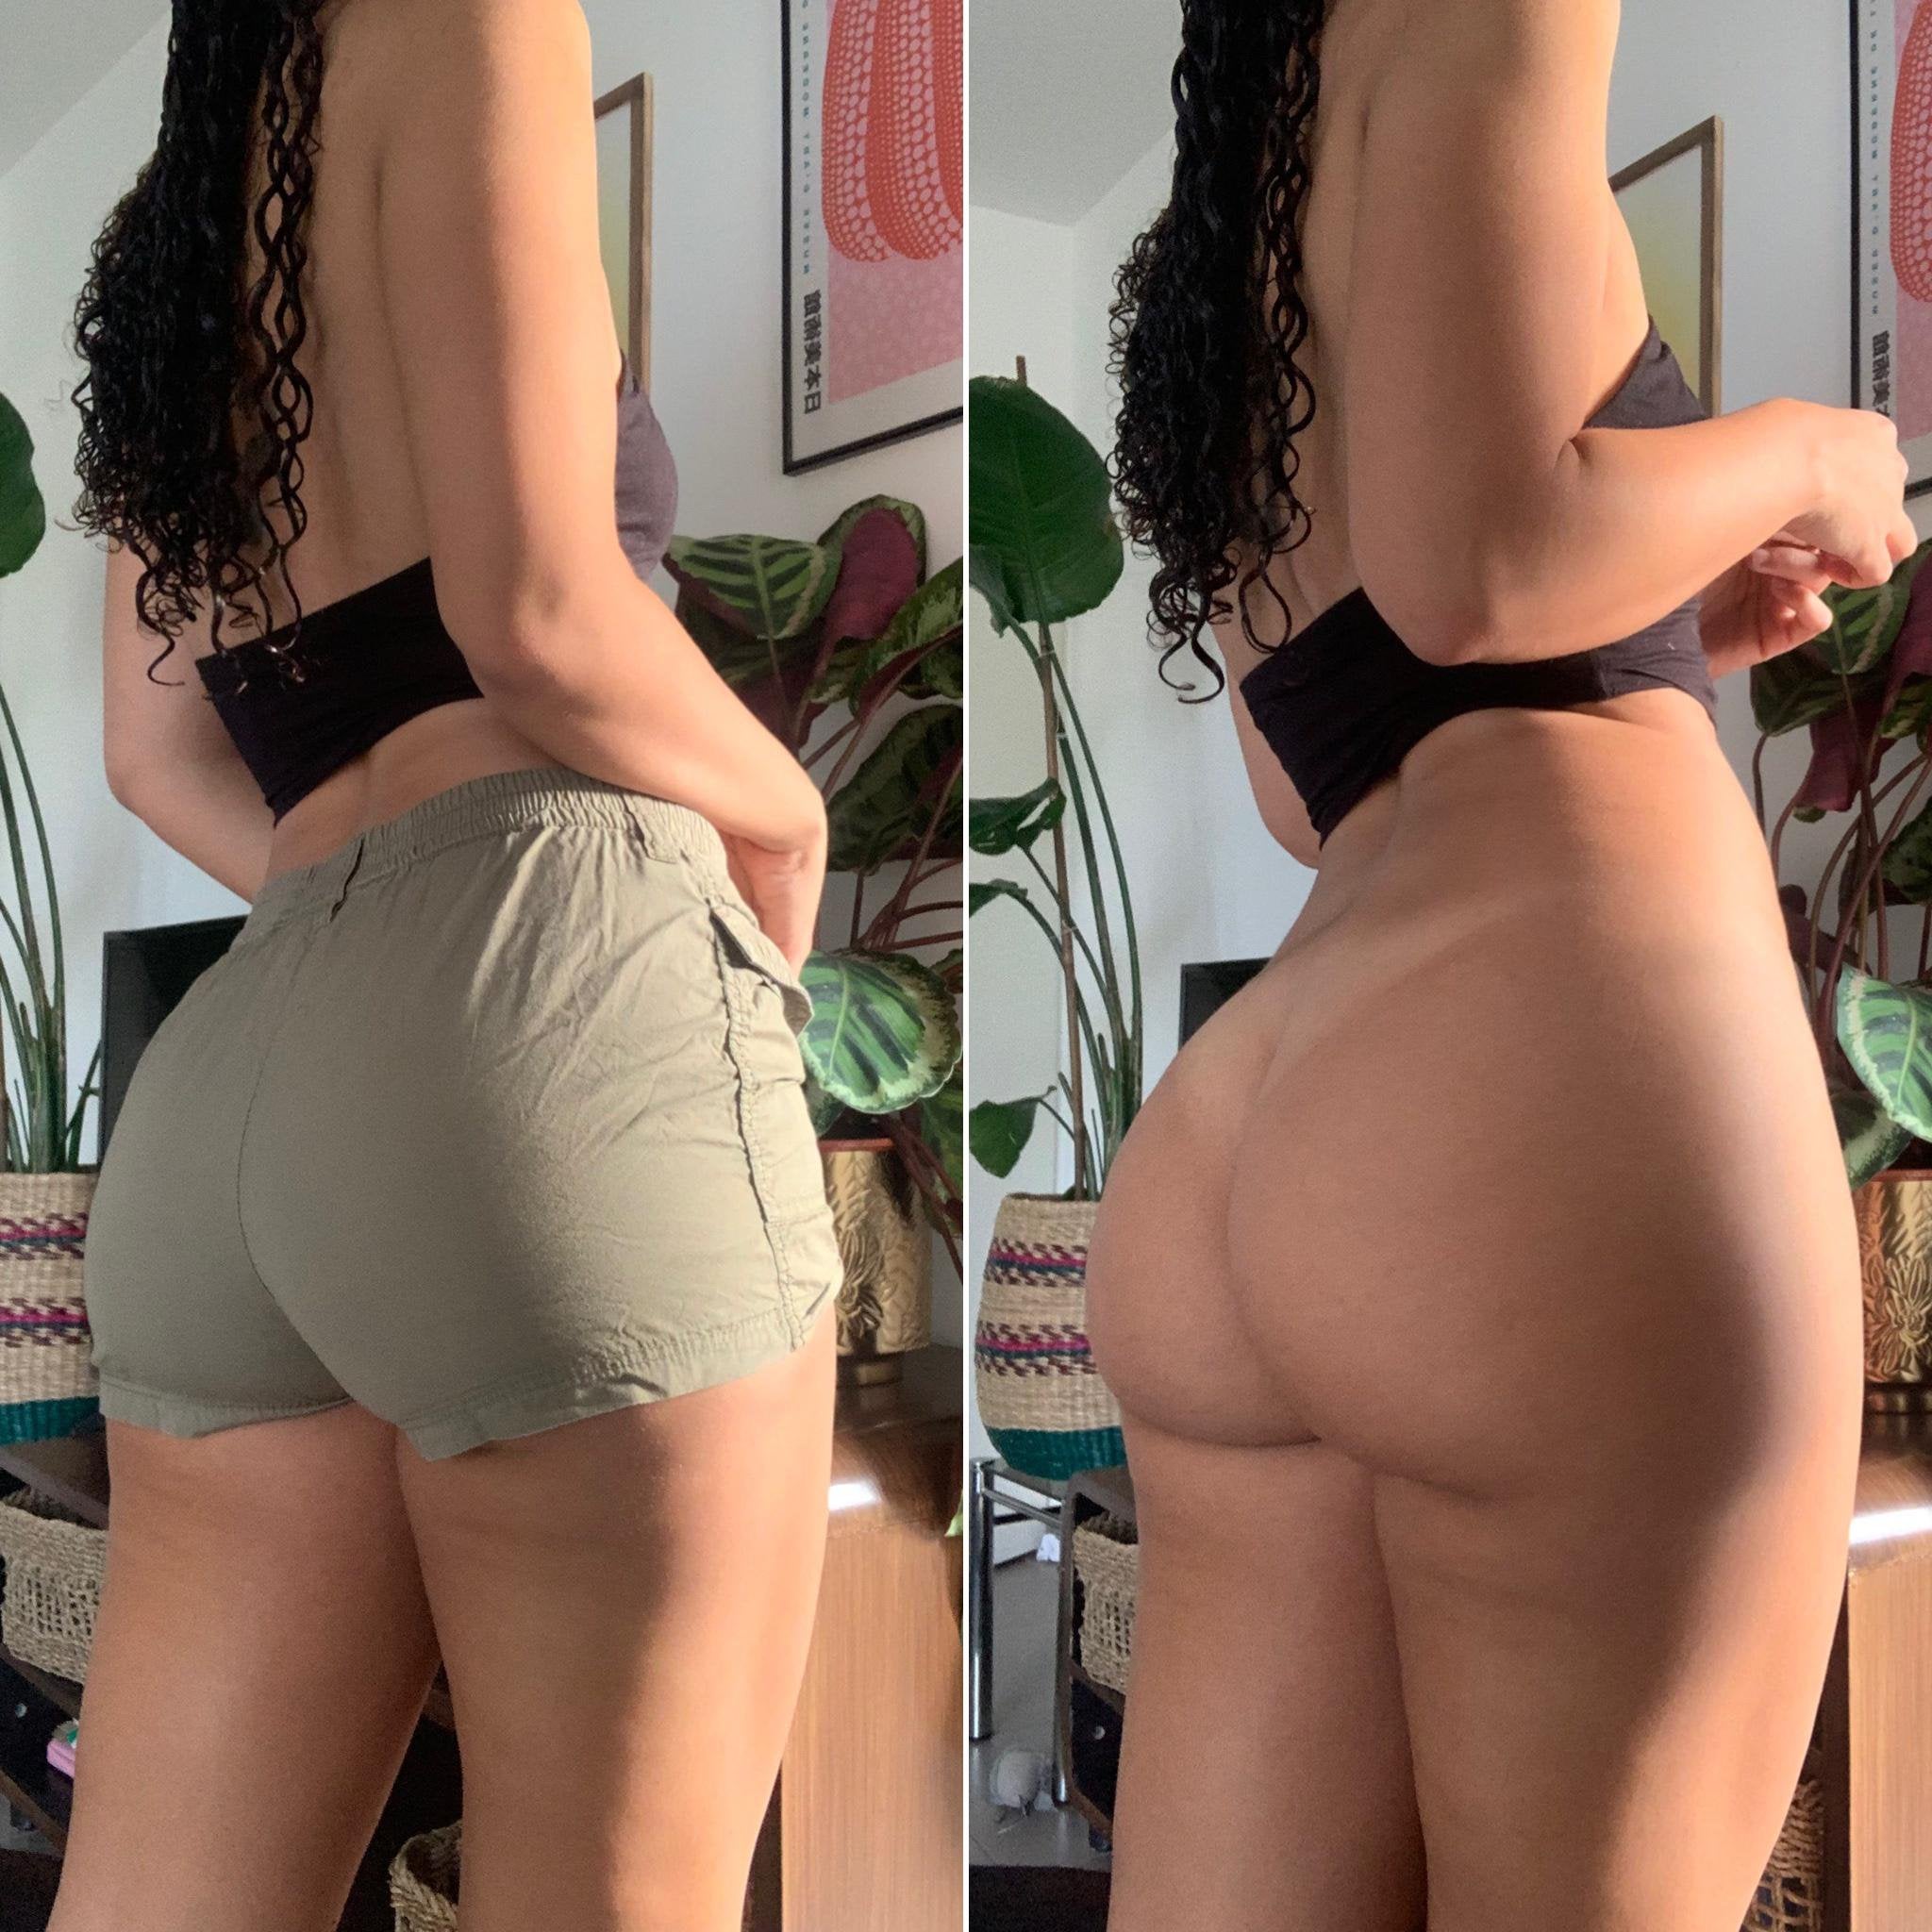 PAWG Happier naked